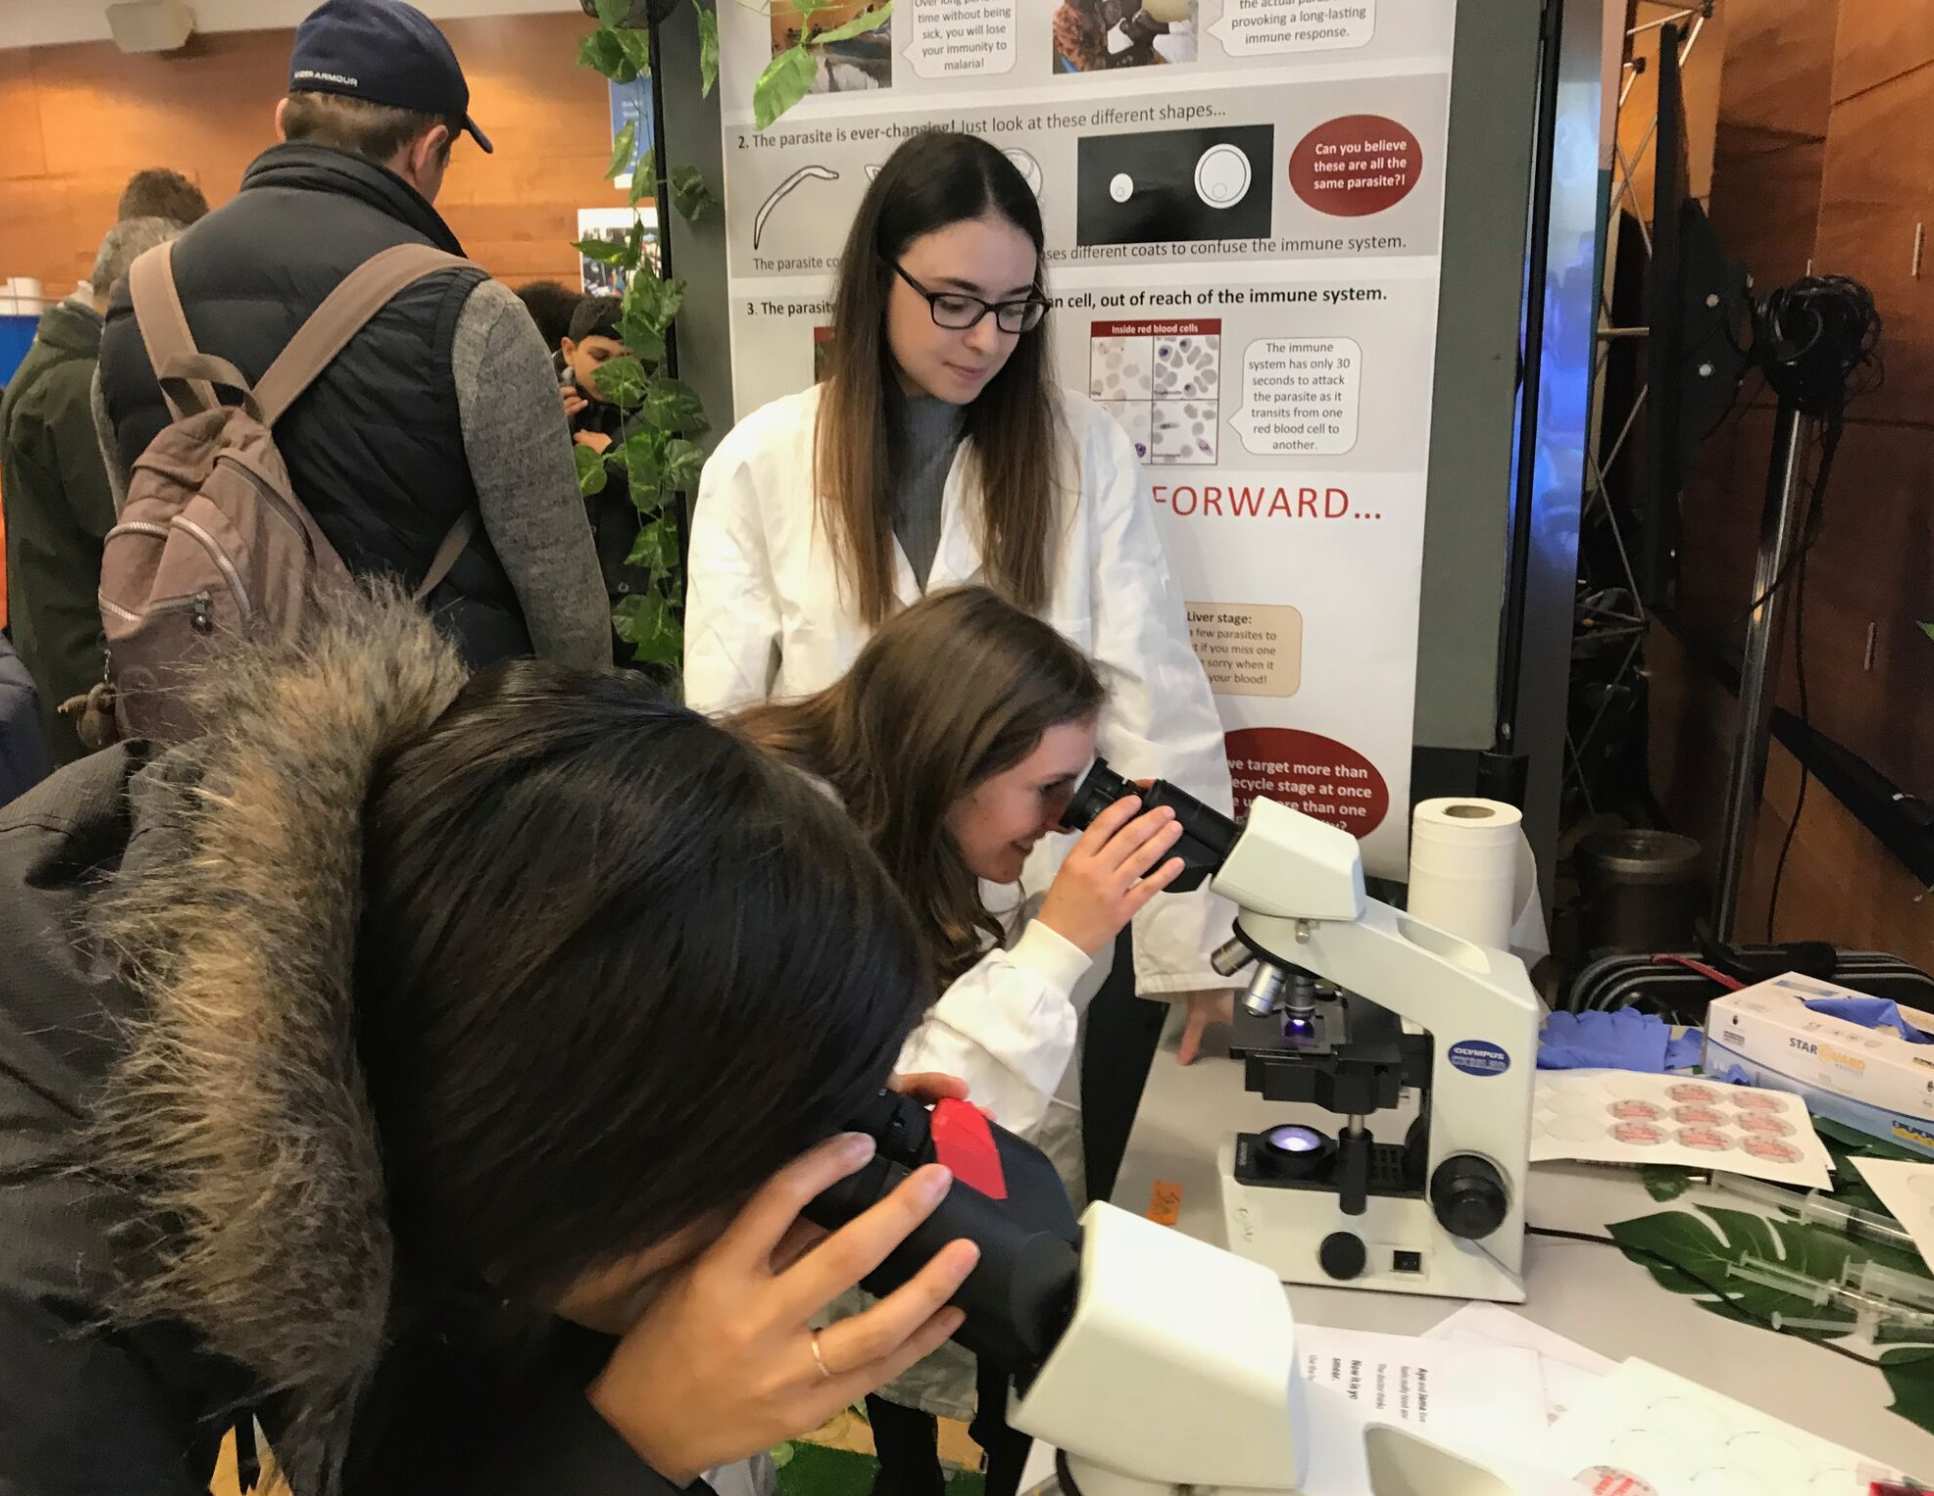 Members of the public look at blood smears through a microscope